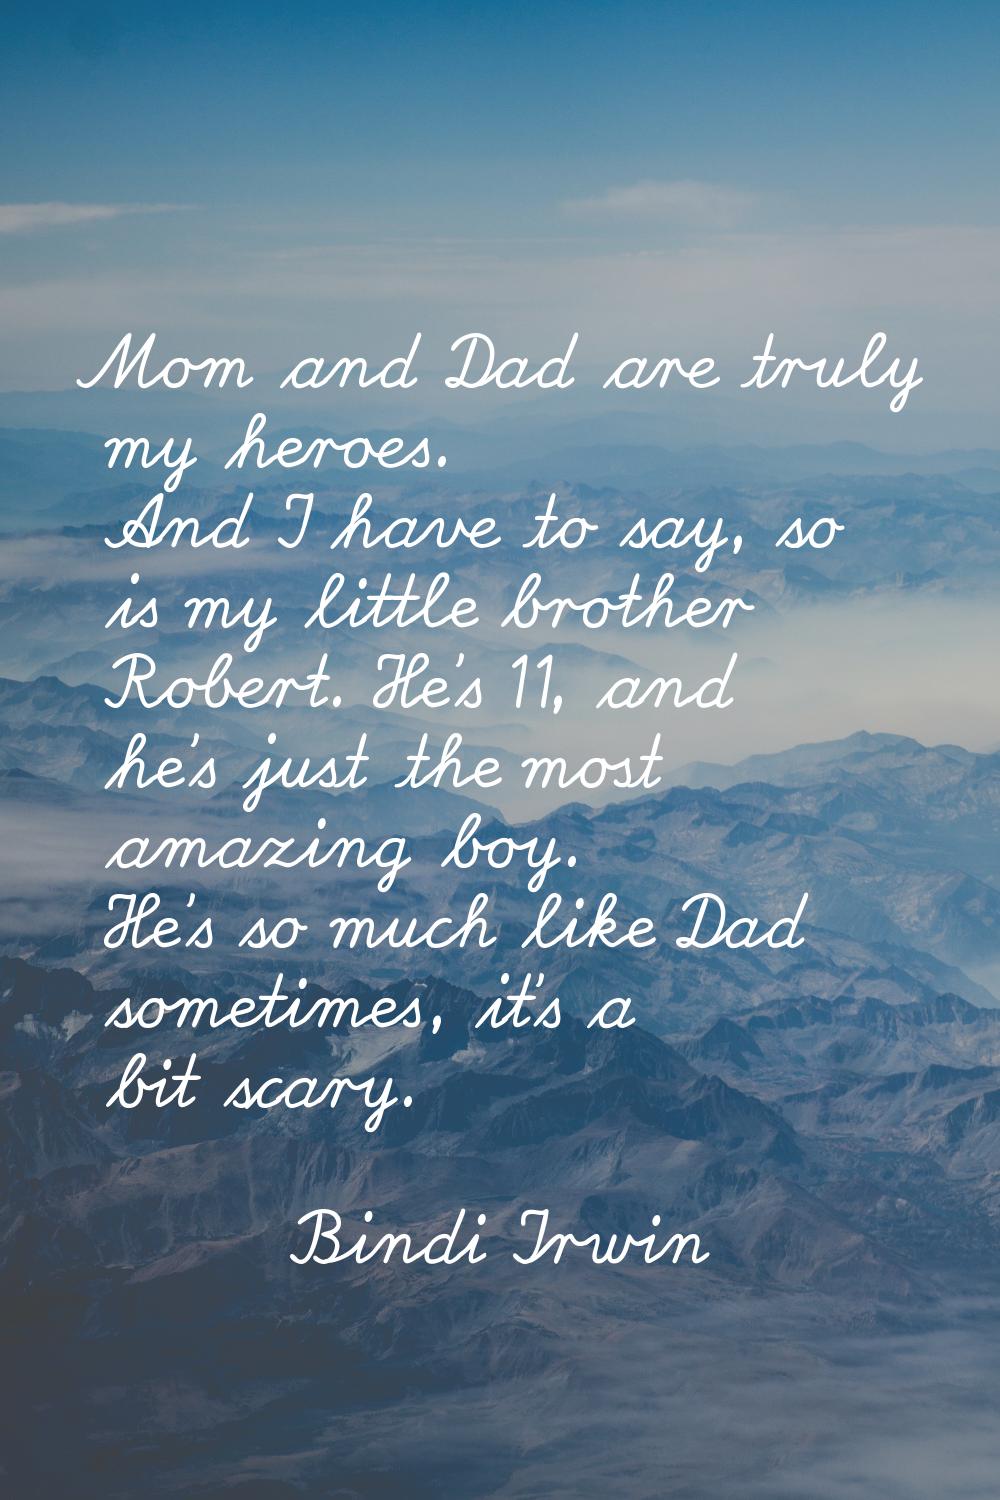 Mom and Dad are truly my heroes. And I have to say, so is my little brother Robert. He's 11, and he